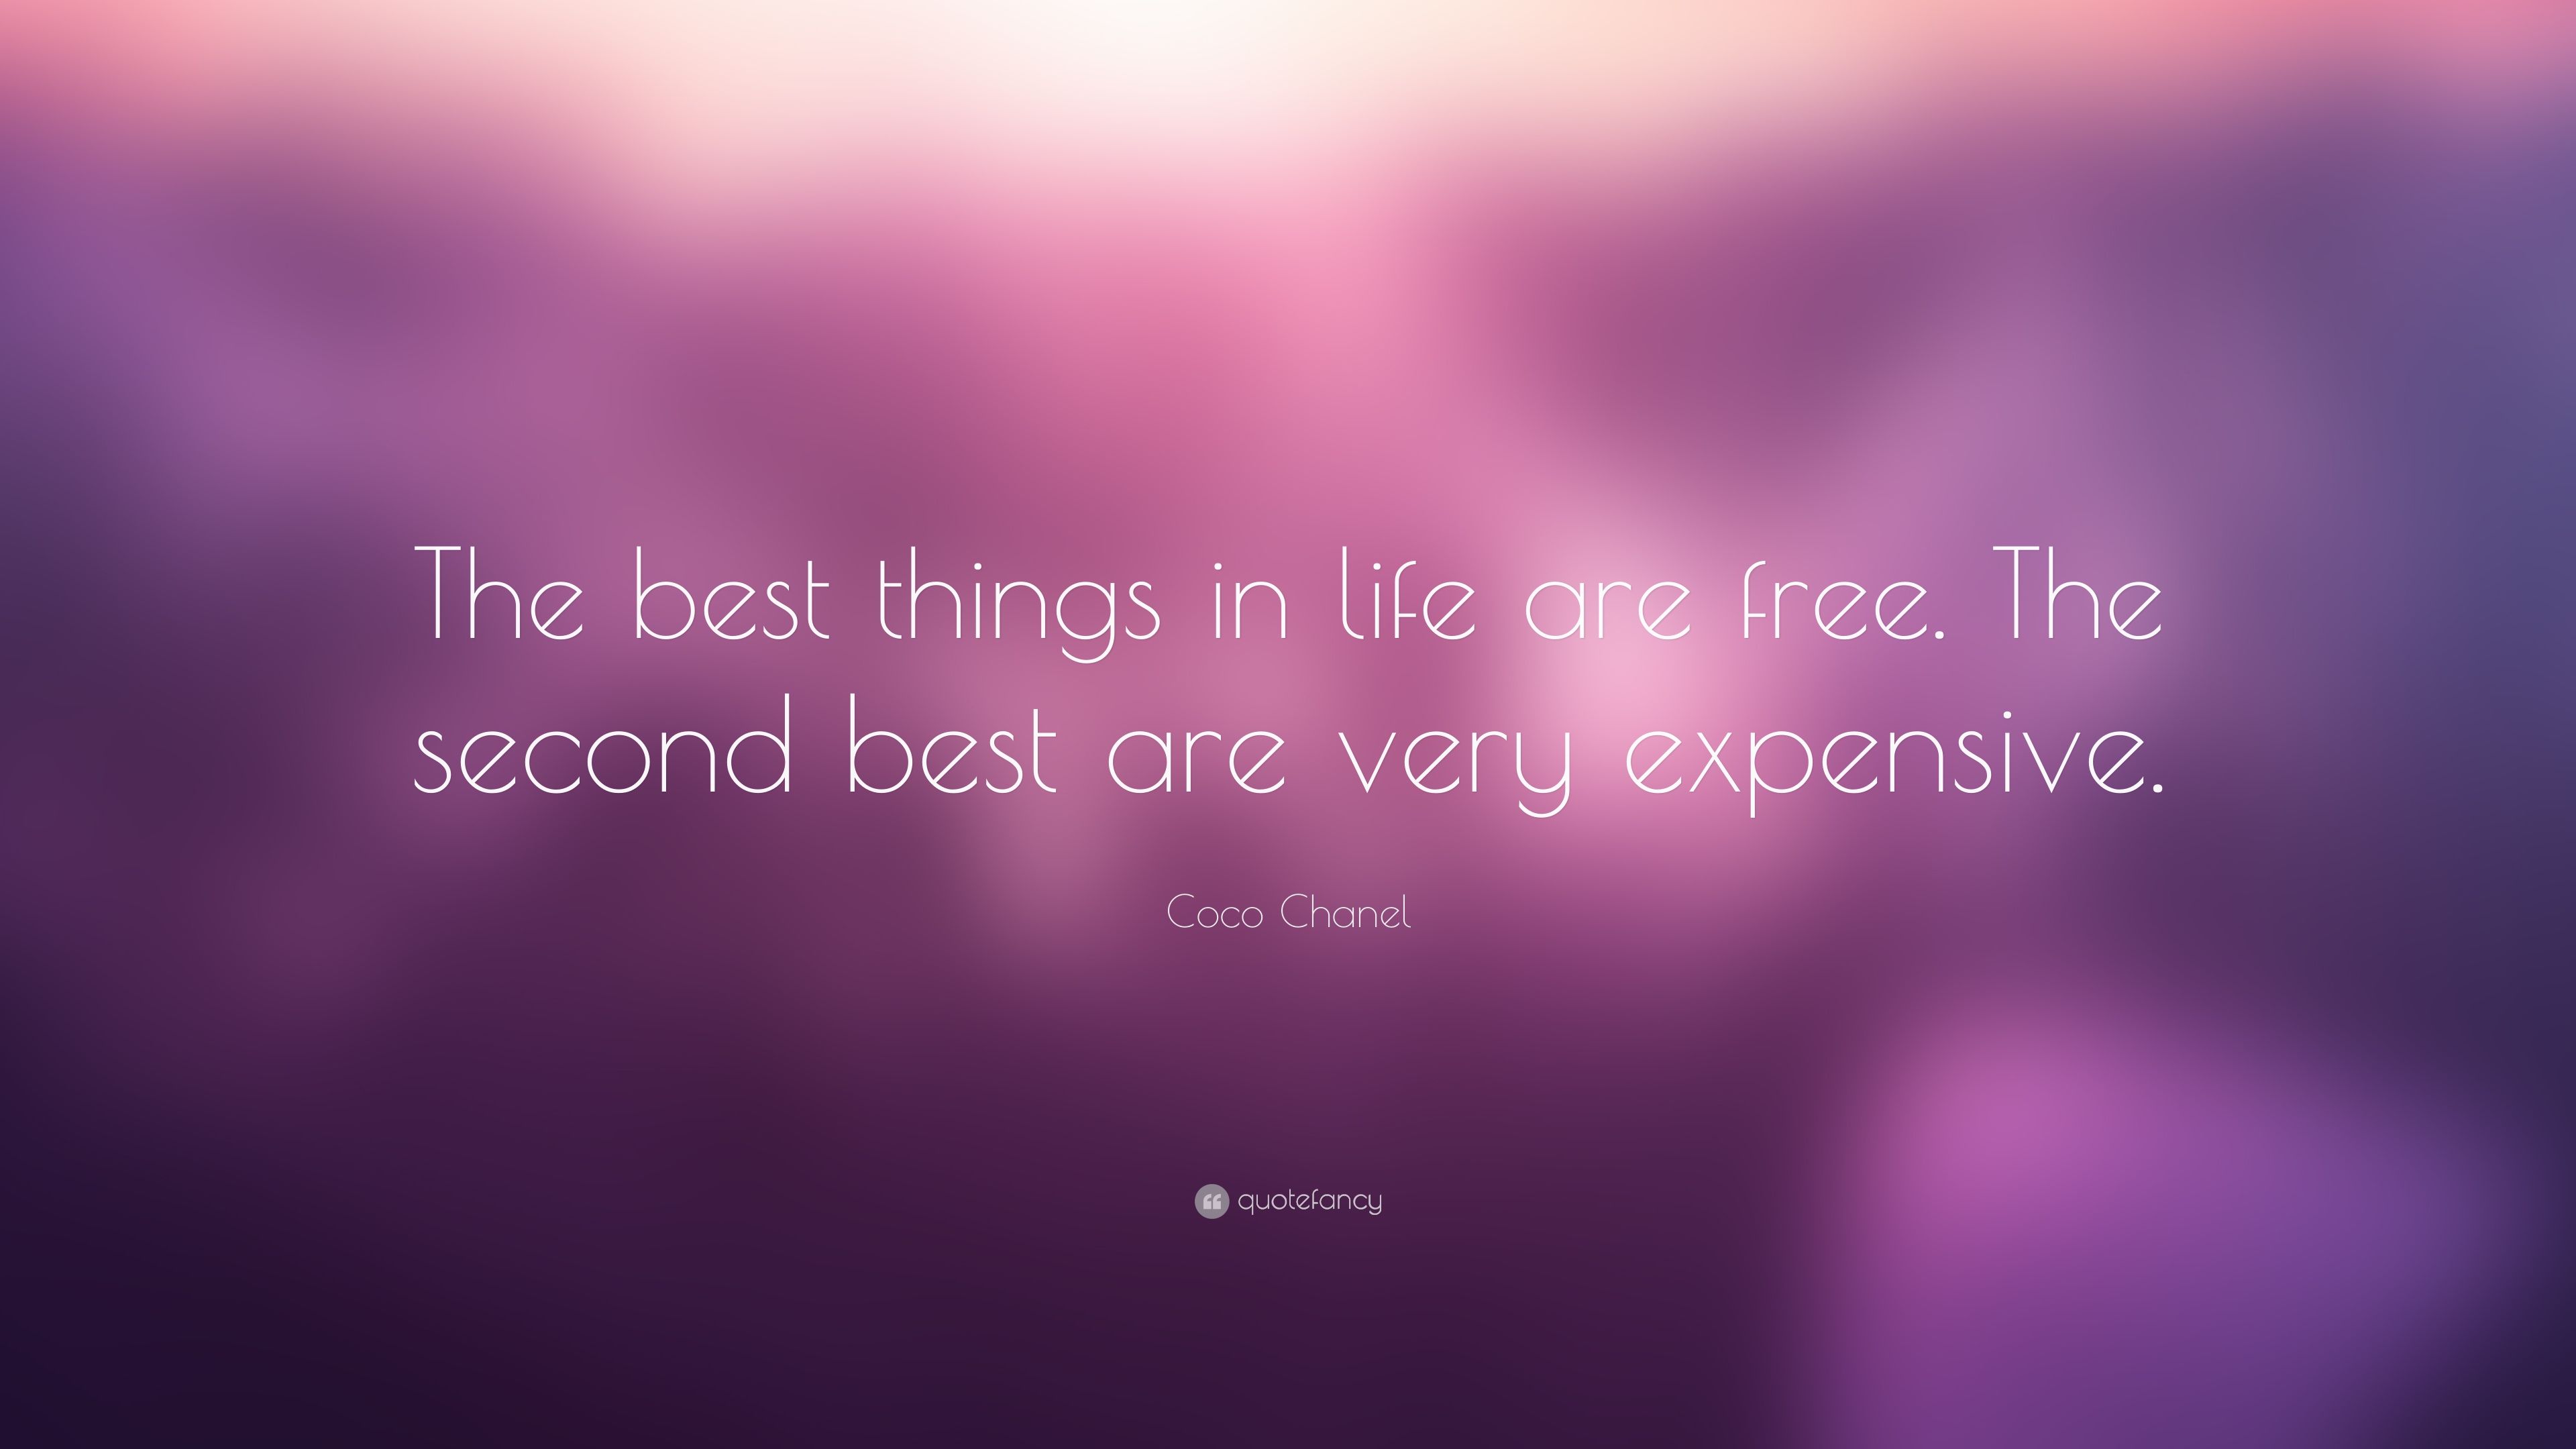 Coco Chanel Quote: “The best things in .quotefancy.com